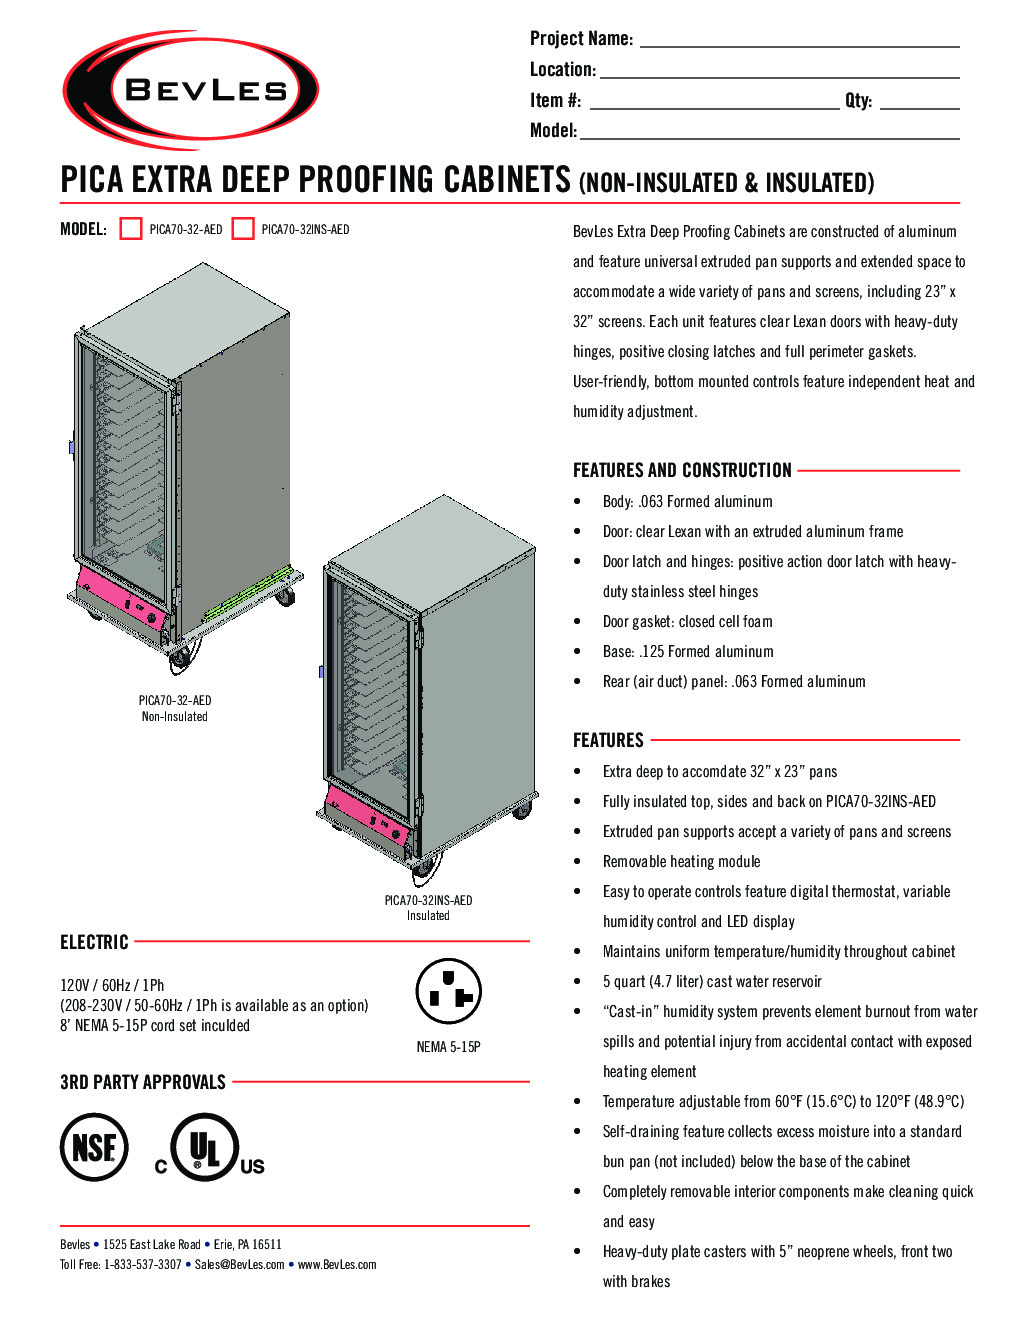 BevLes Company PICA70-32INS-AED-1R2 Mobile Proofer Cabinet